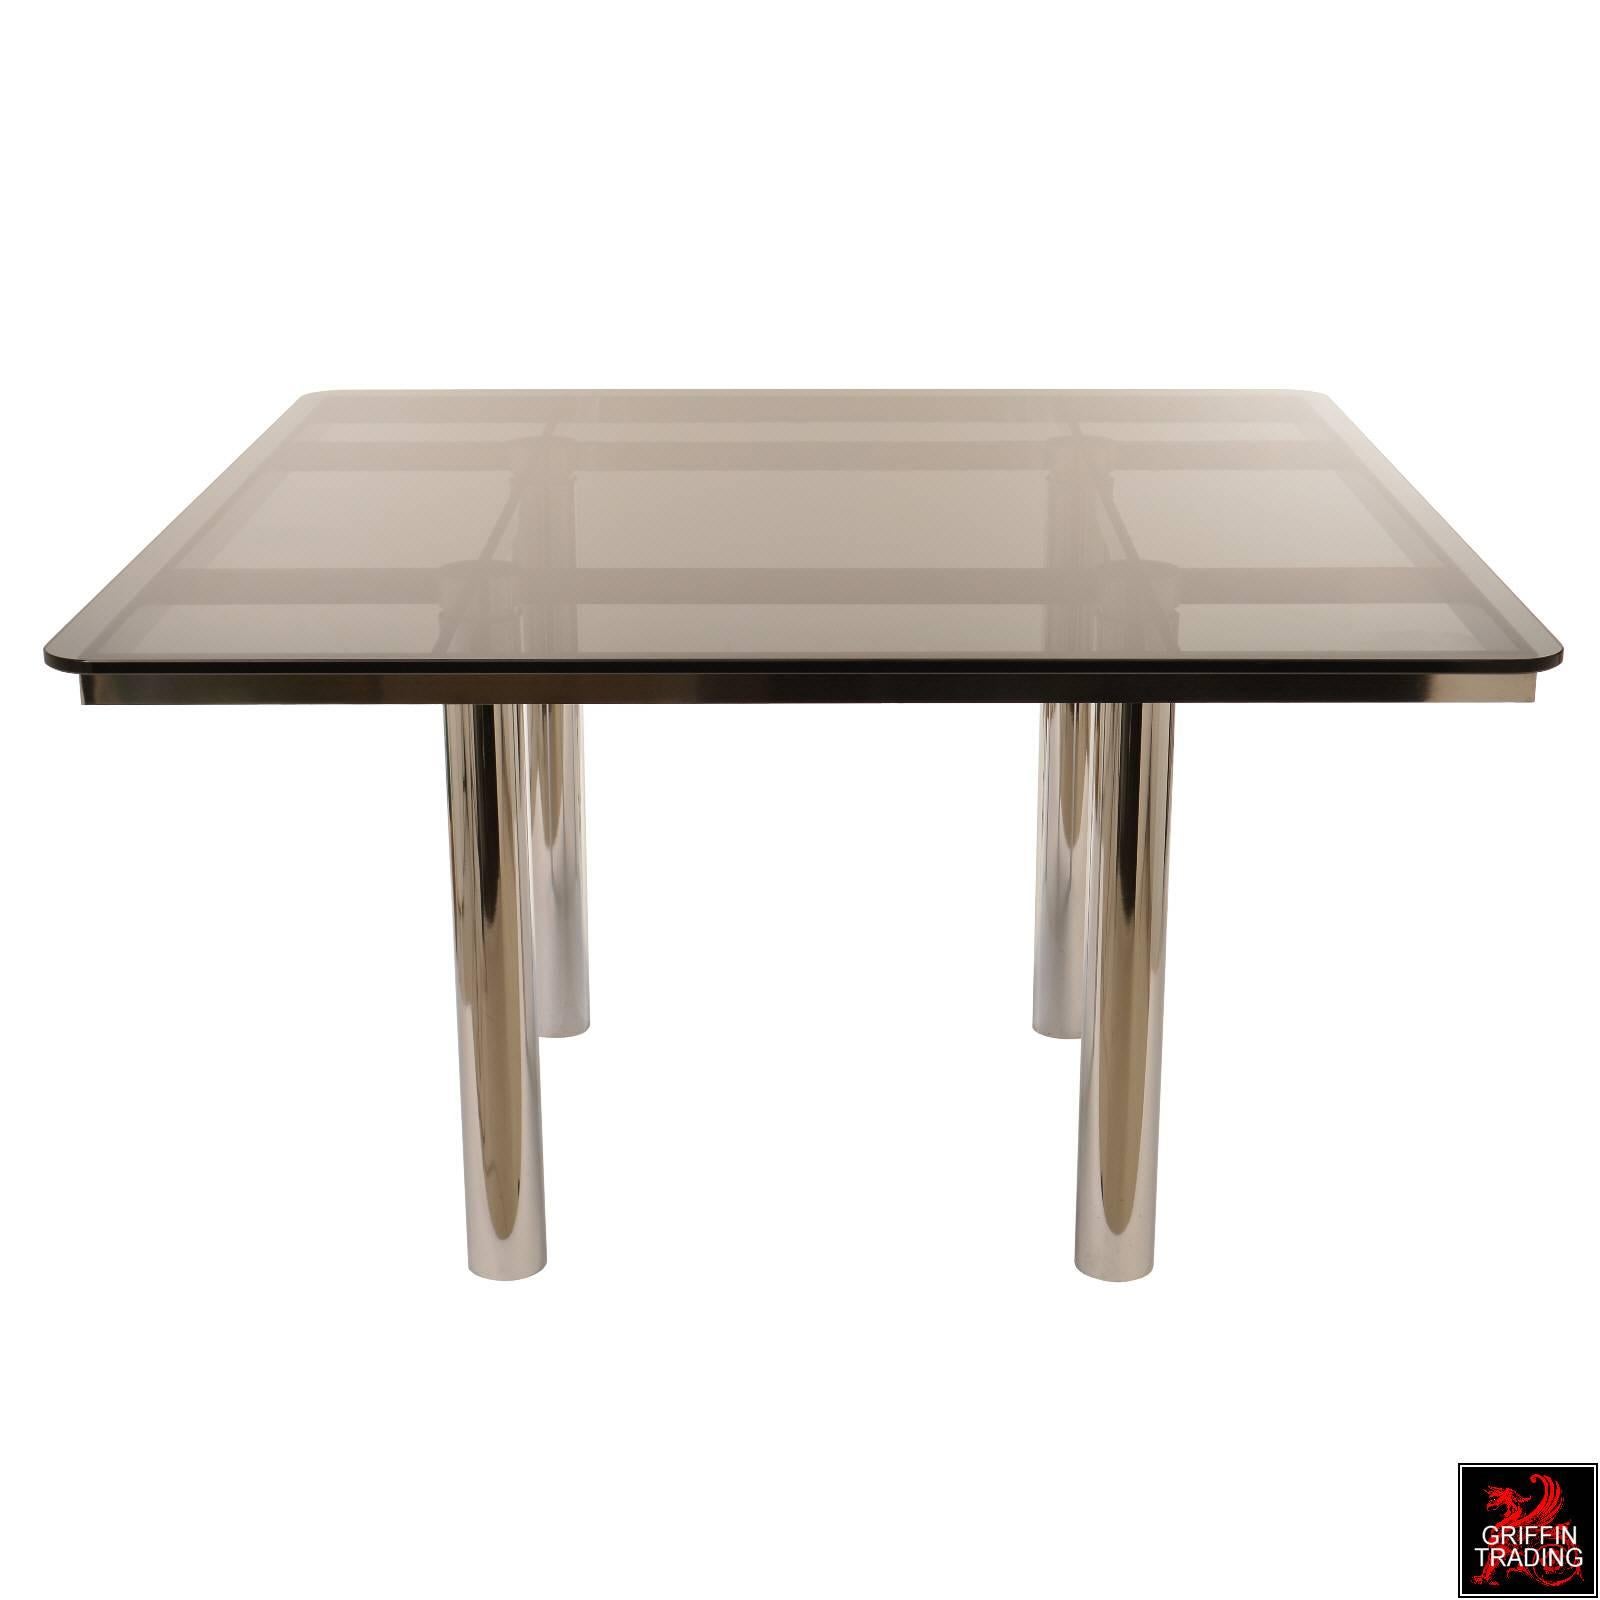 This architectural style dining table with its bold grid pattern made of chrome steel is called Andre. The Andre dining table was created by the Italian designer Tobia Scarpa in 1967 and was produced by Gavina in Italy. Gavina was purchased in 1968